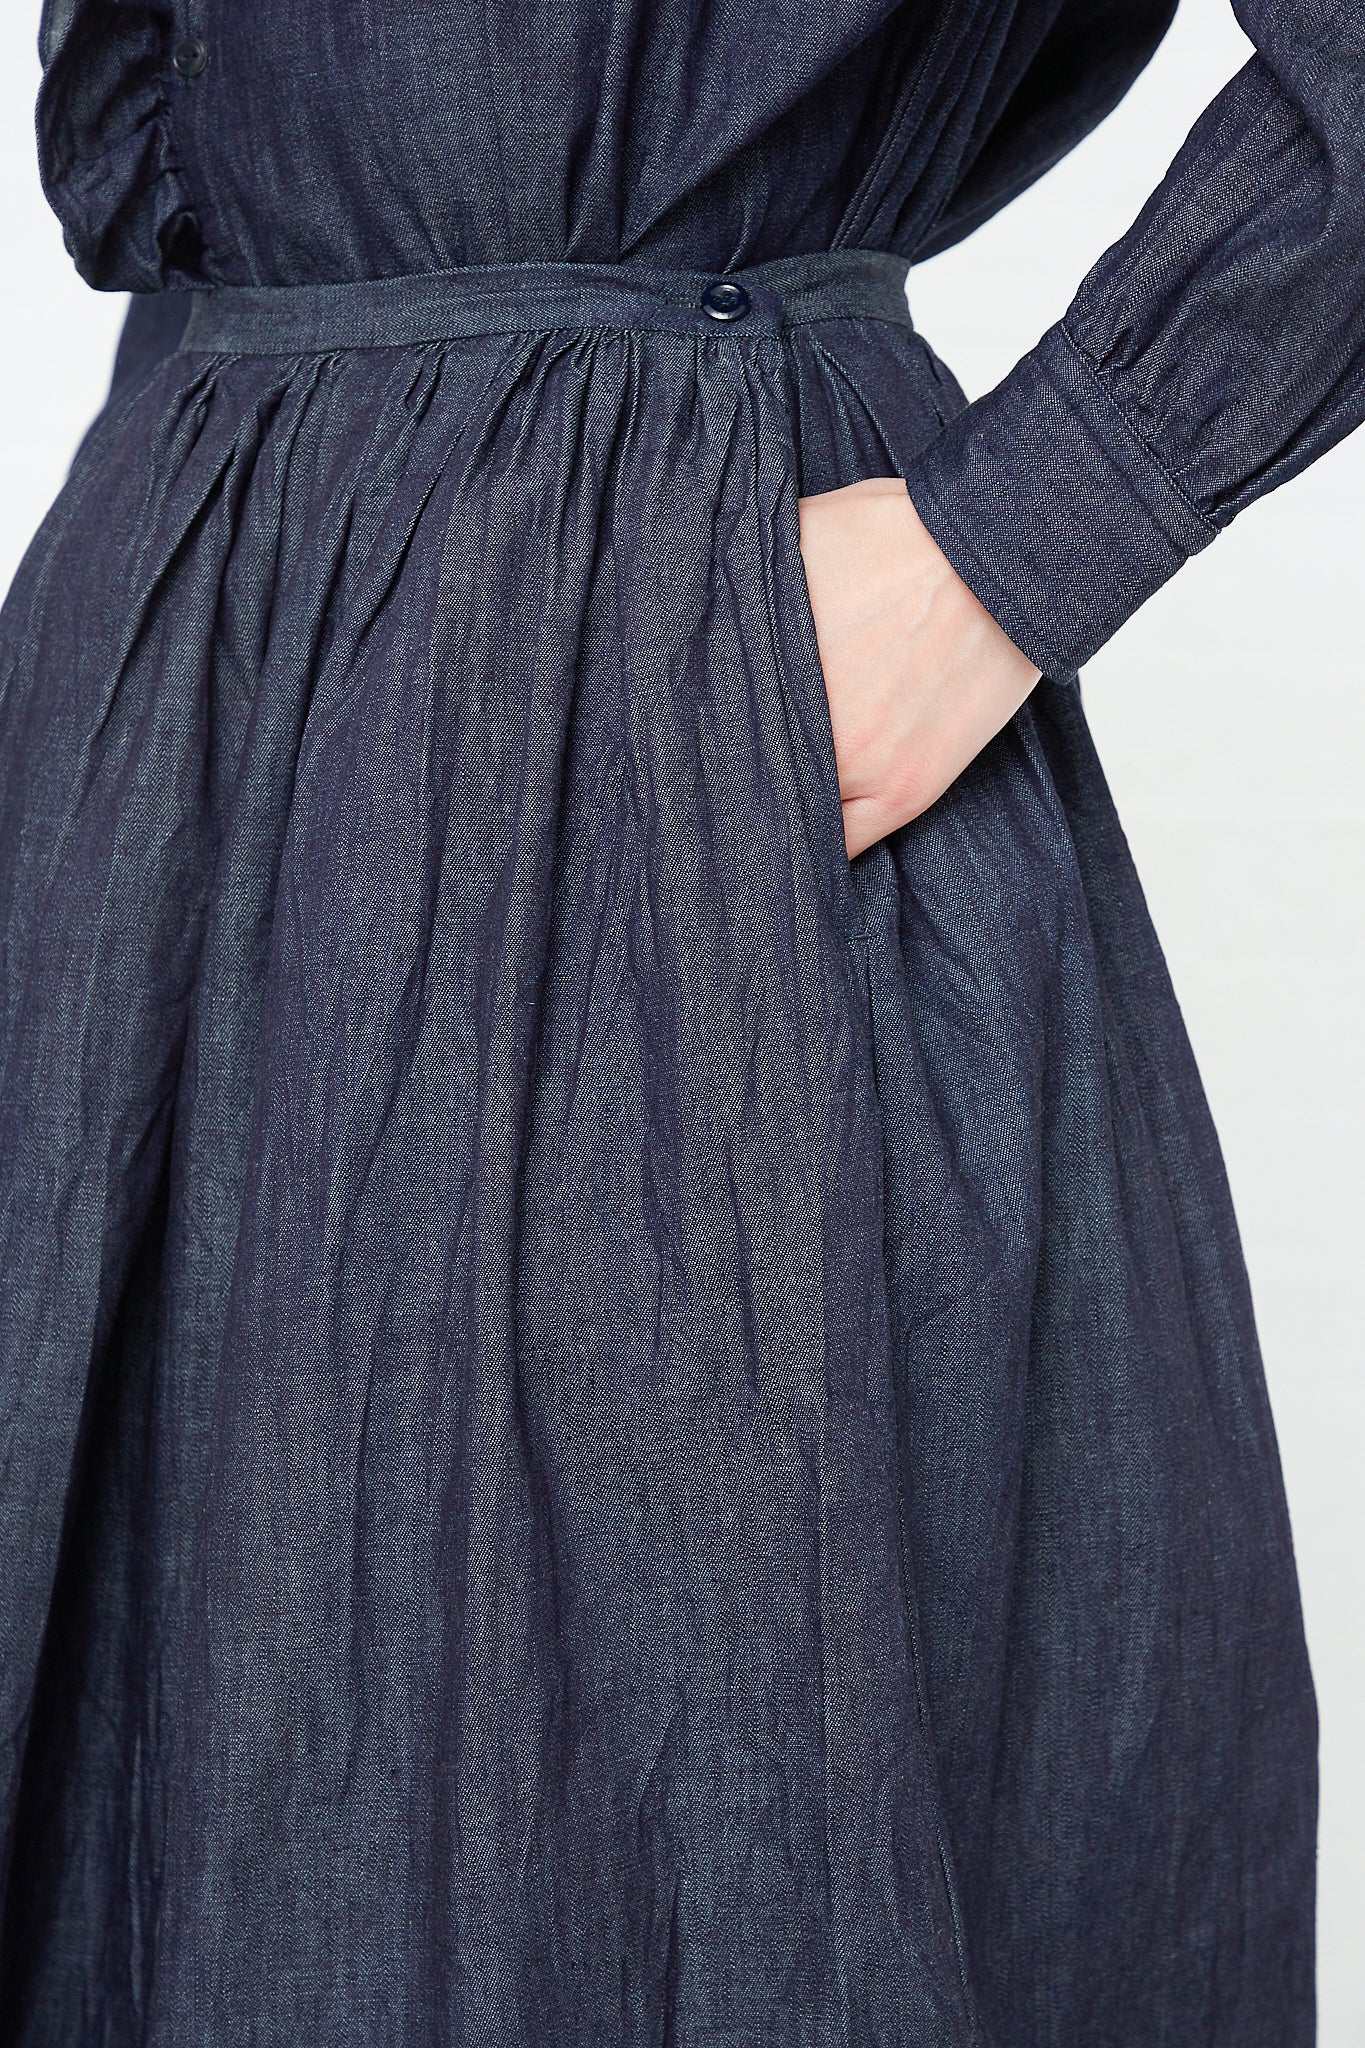 An organic Cotton Denim Cloth Pleated Maxi Skirt in Indigo by Toujours. Available at Oroboro Store.